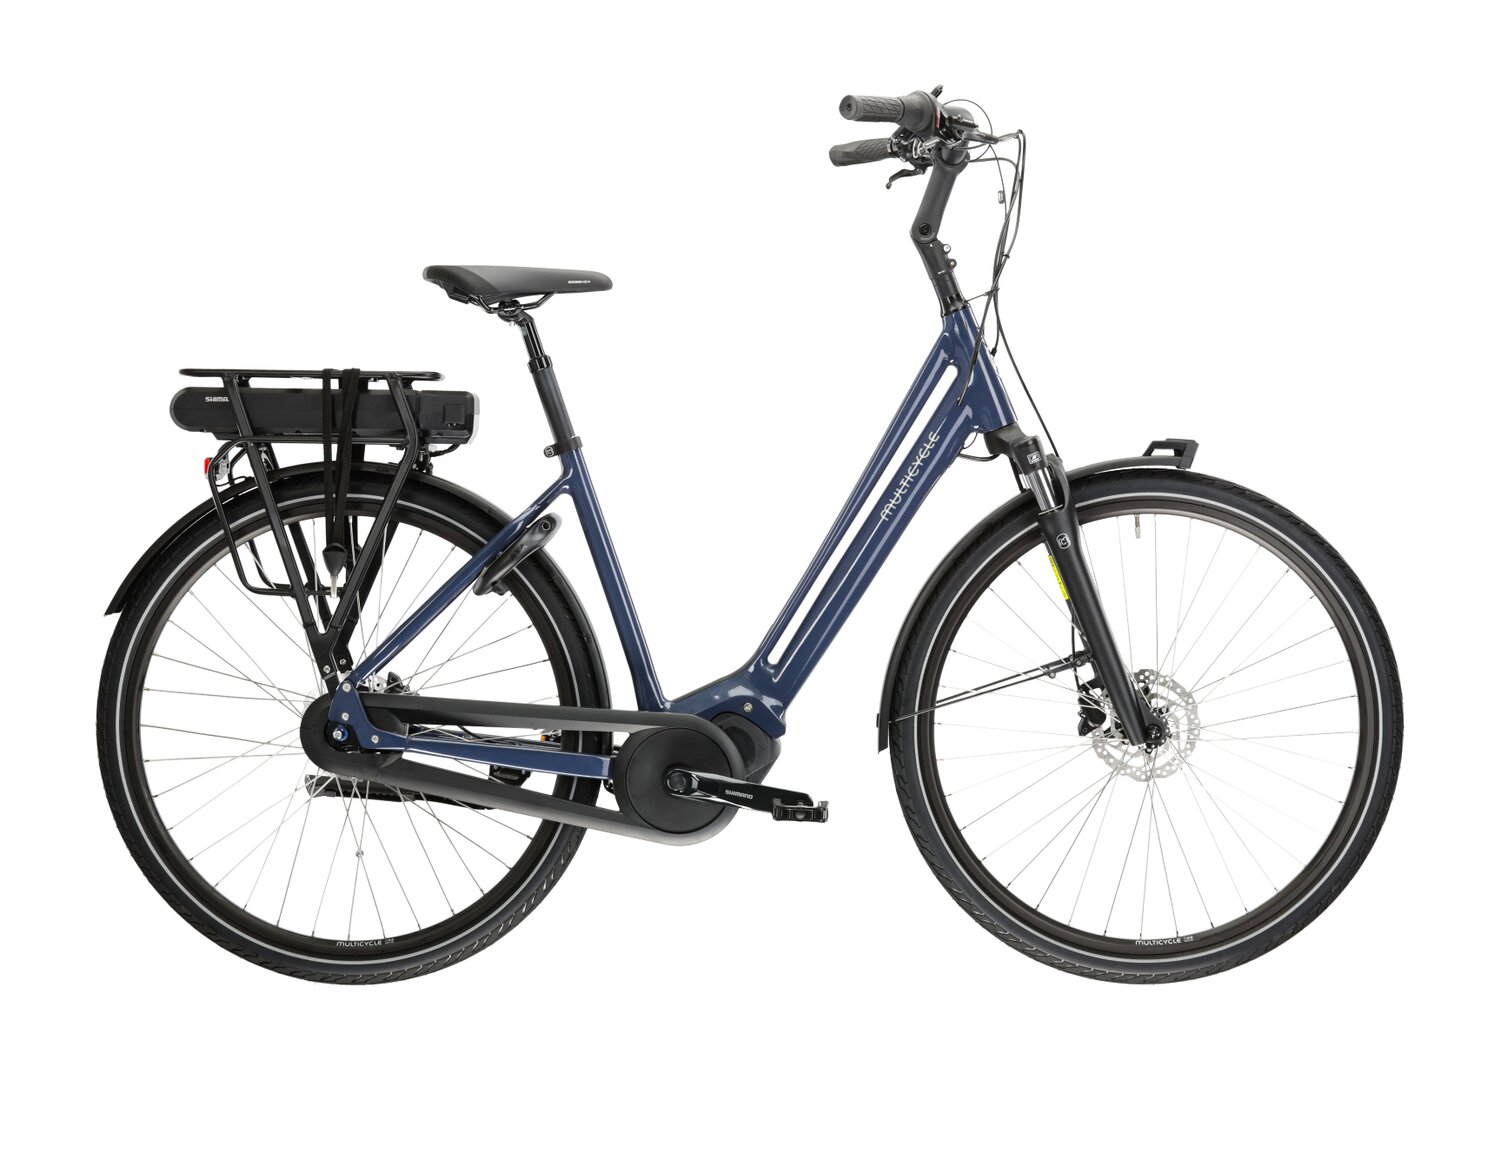 Solo EMI Multicycle 418 WH